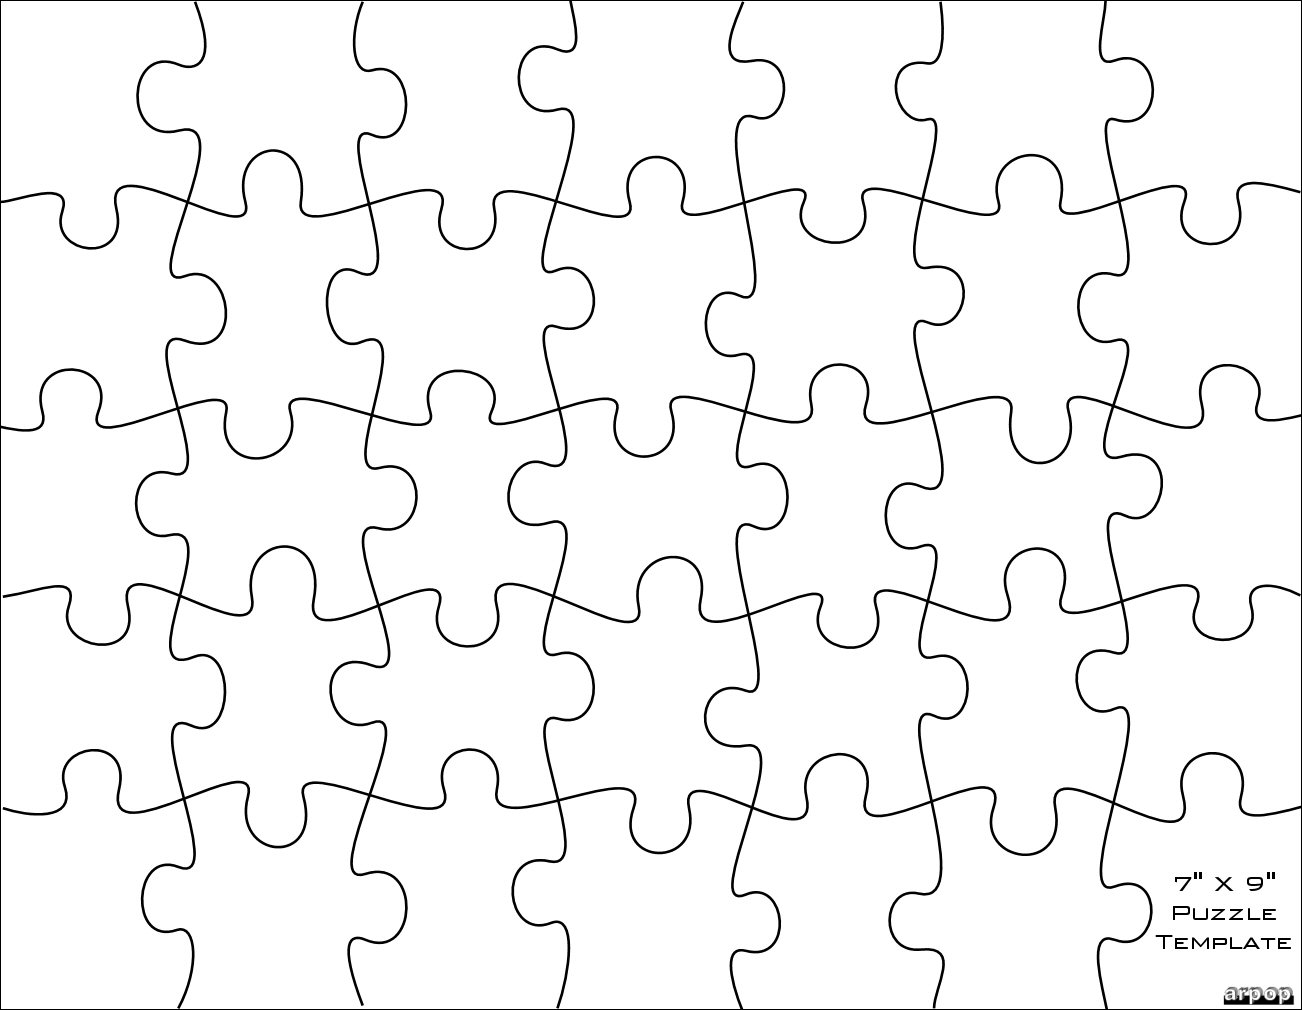 Free Puzzle Pieces Template, Download Free Puzzle Pieces